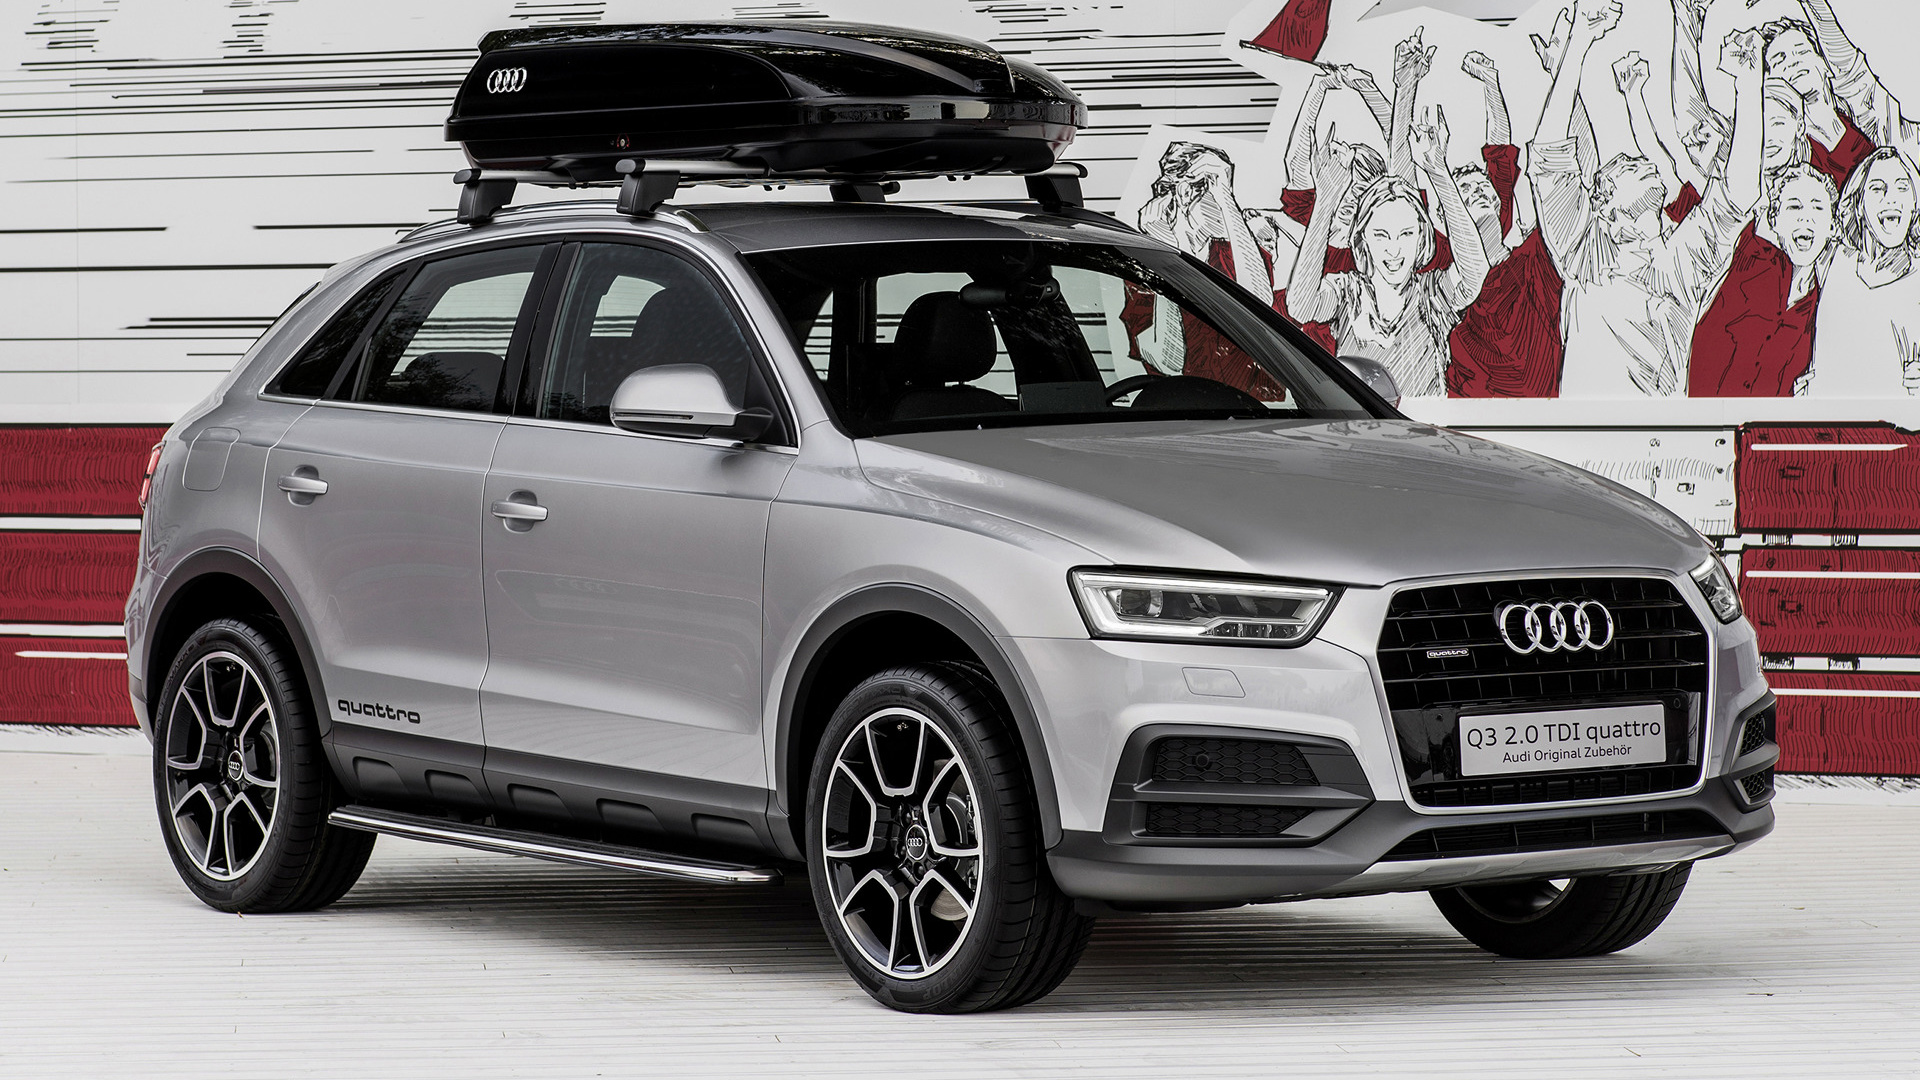 2015 Audi Q3 with Genuine Accessories - Wallpapers and HD Images